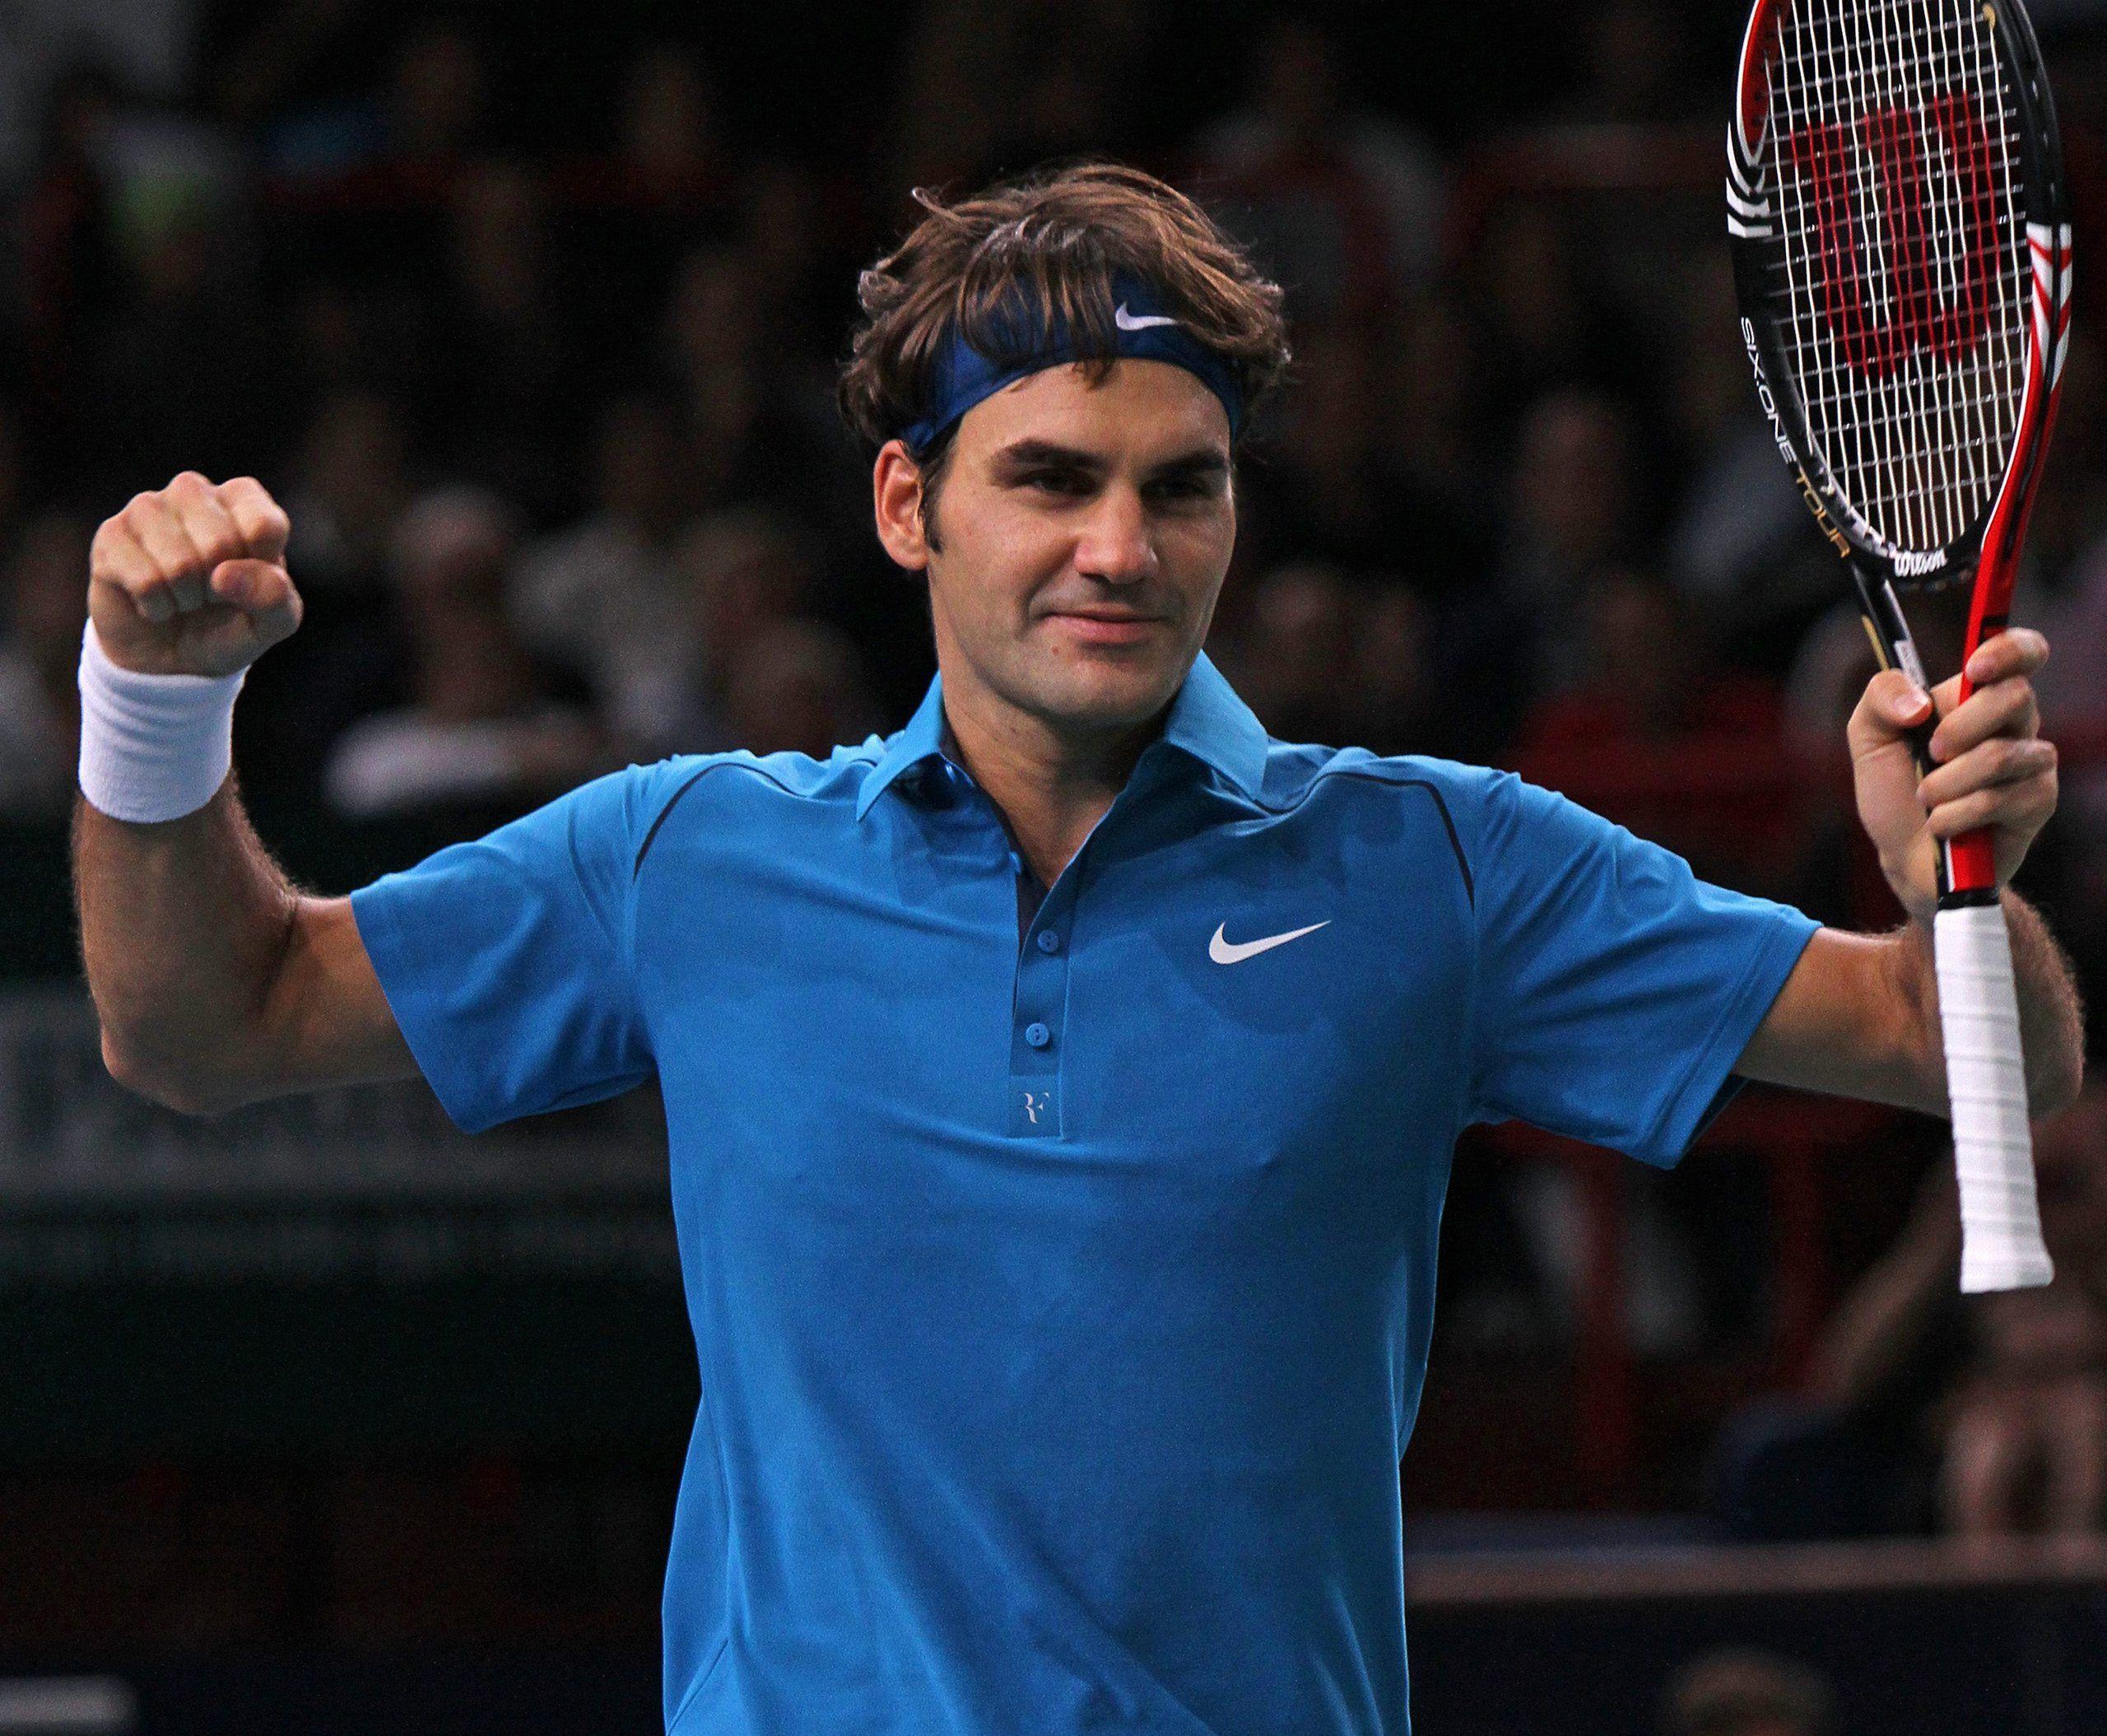 Laver Cup 2022: How to watch Roger Federer vs Team World match Financial Blog